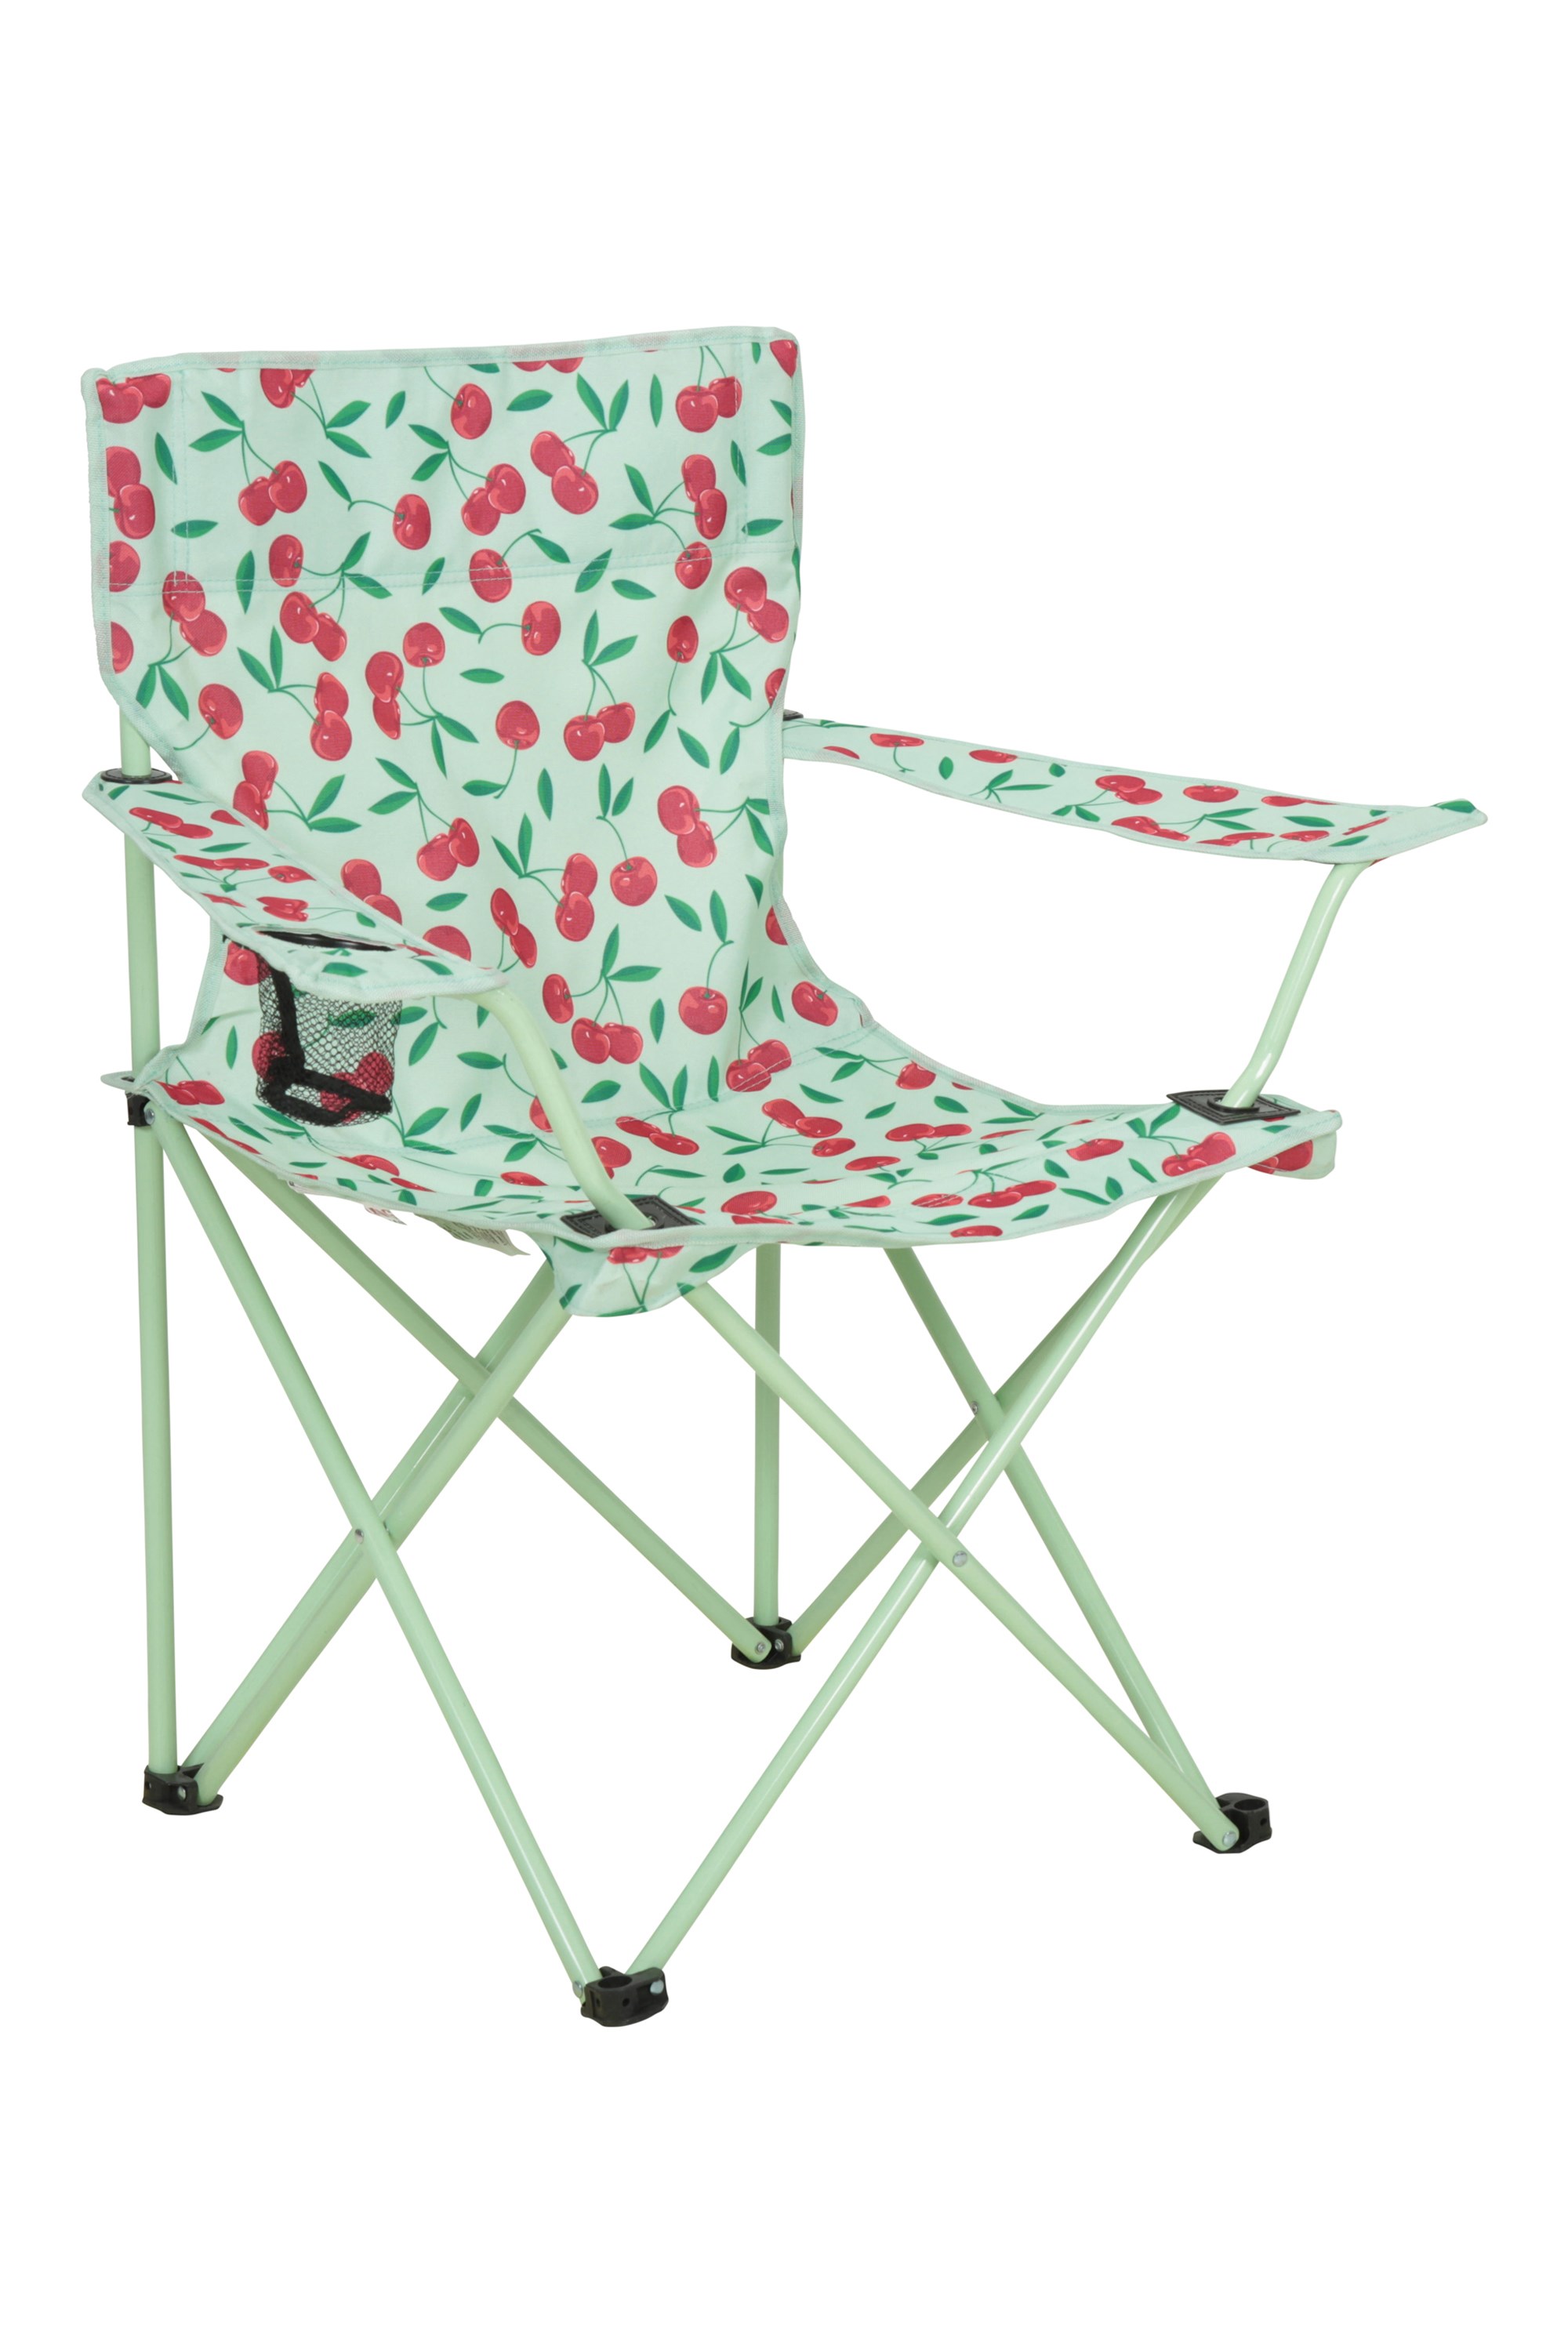 Cup Holder Camping Chair Mountain Warehouse Patterned Folding Chair